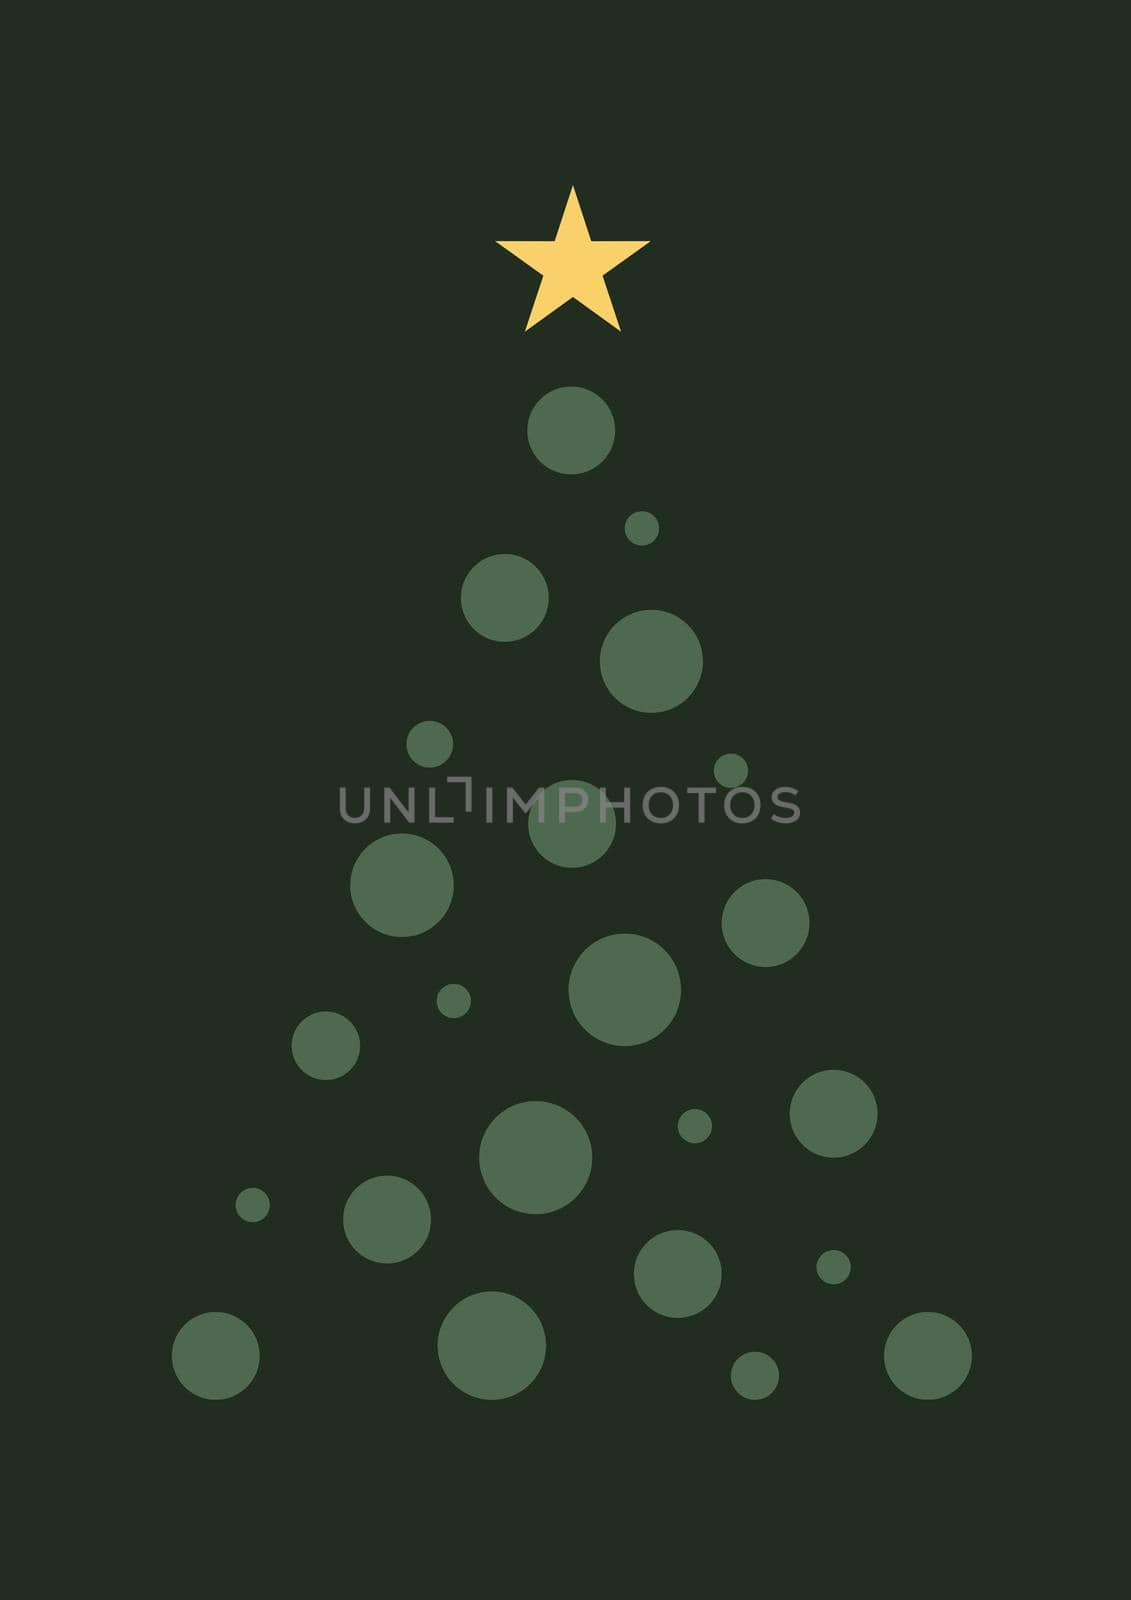 The vertical vector simple Christmas tree with dark green greeting card background